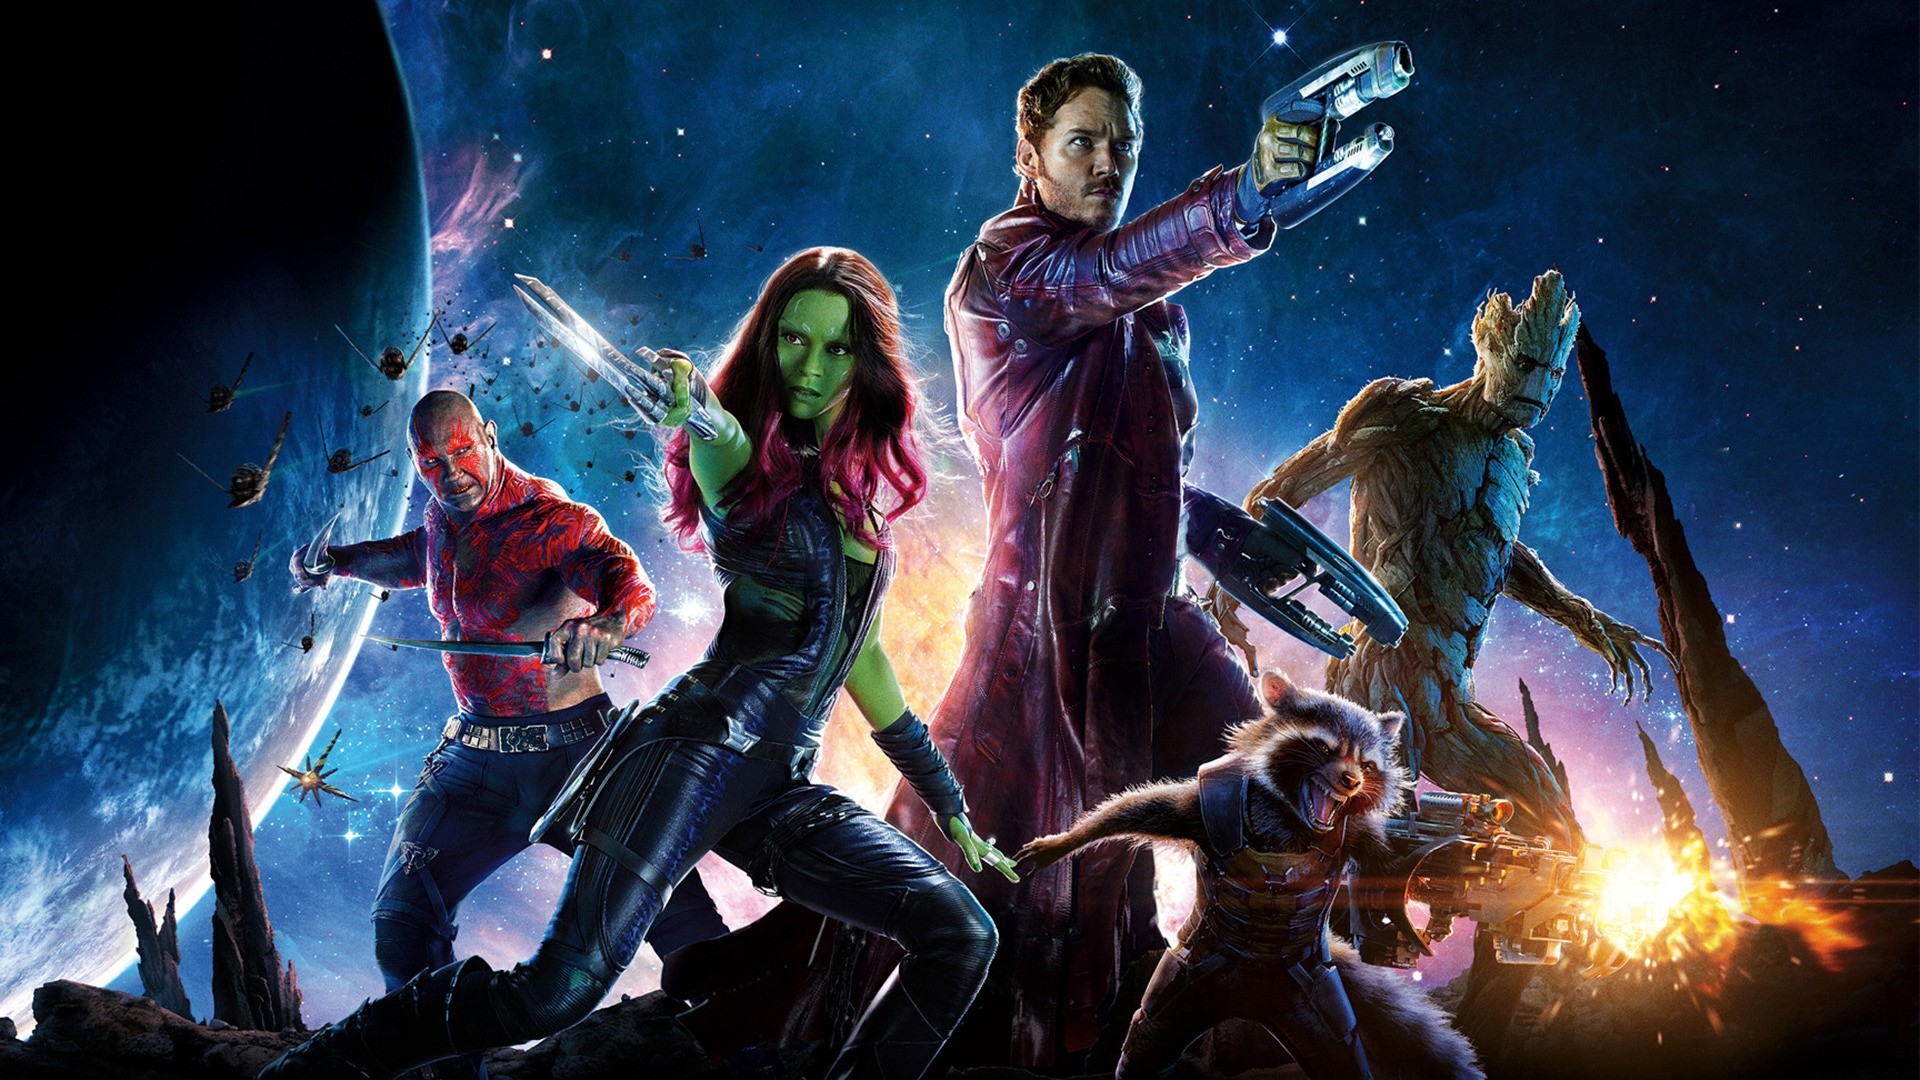 Guardians Of The Galaxy, Star Lord, Gamora, Rocket Raccoon, Groot, Drax The Destroyer, Movies Wallpaper